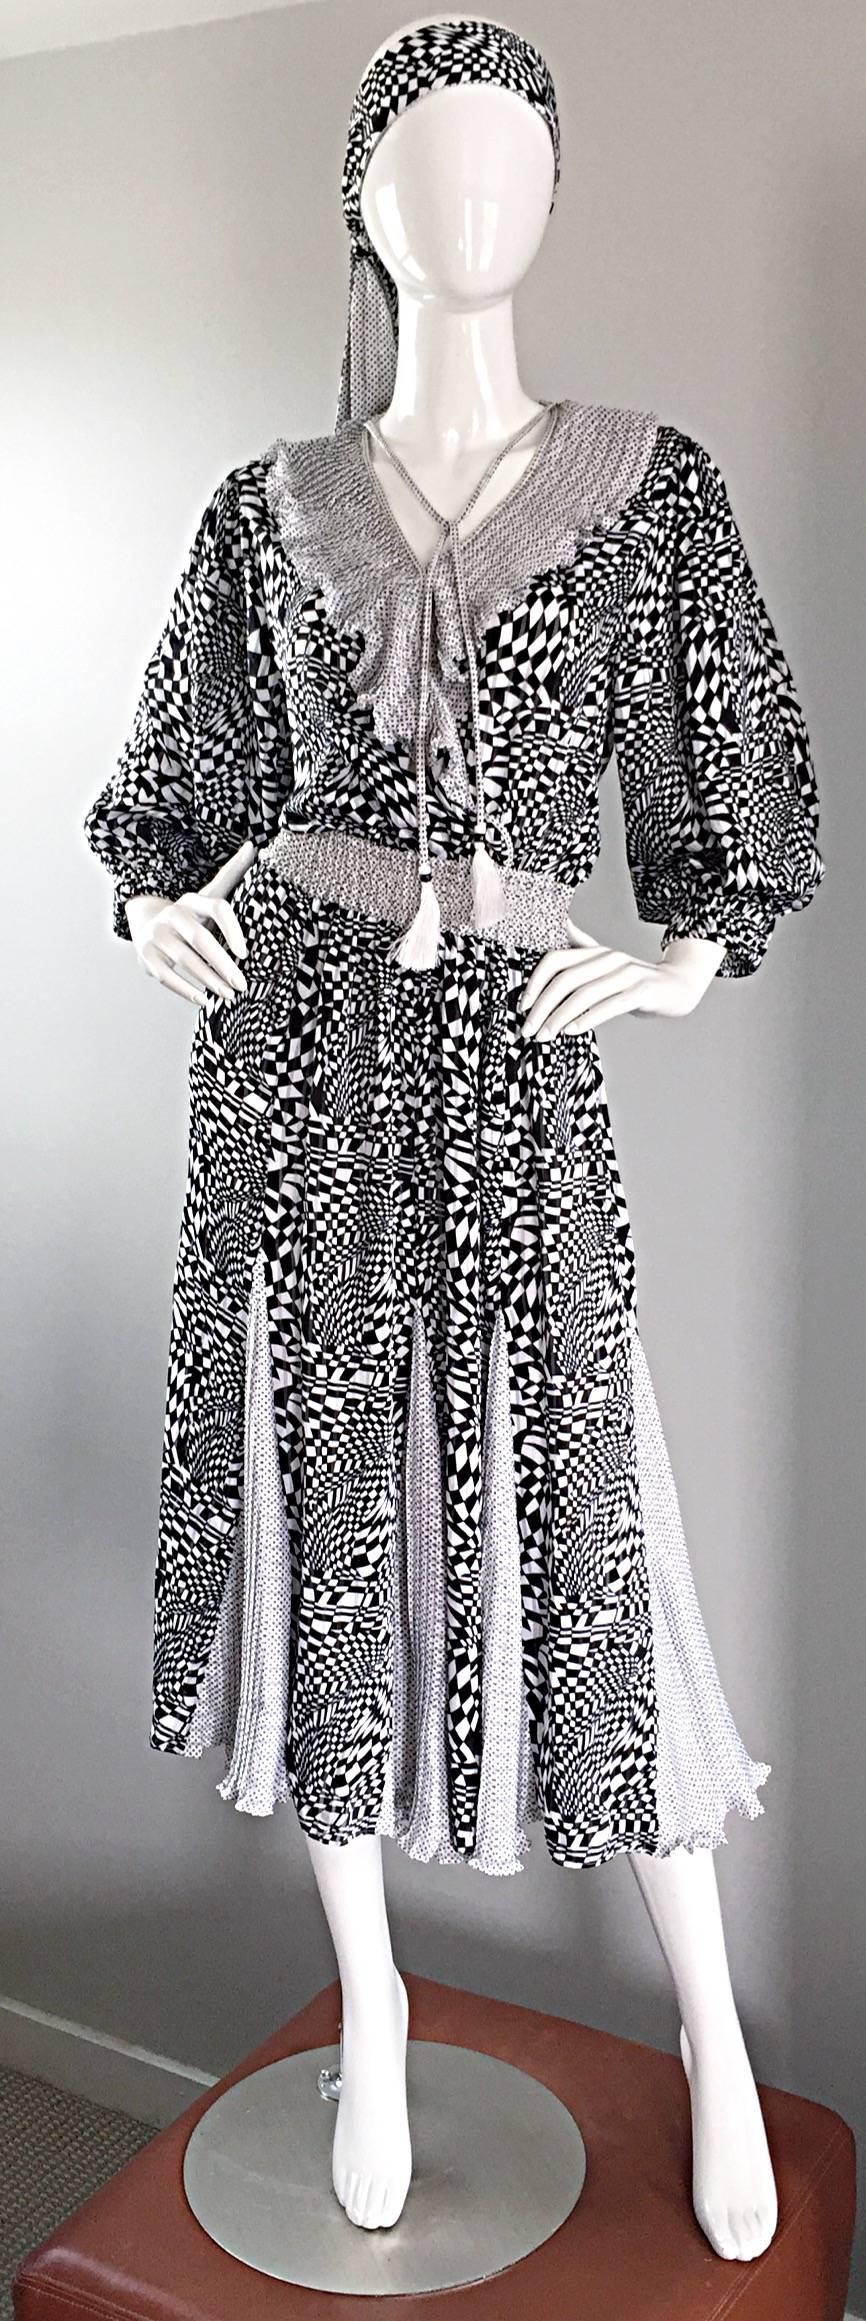 Amazing vintage DIANE FREIS / FRES black and white 3-D geometric print bohemian dress AND head scarf! So much detail int his signature Freis number! Contrasting polka dot printed ruffles at the bust, on one side of the head scarf, waistband, and on